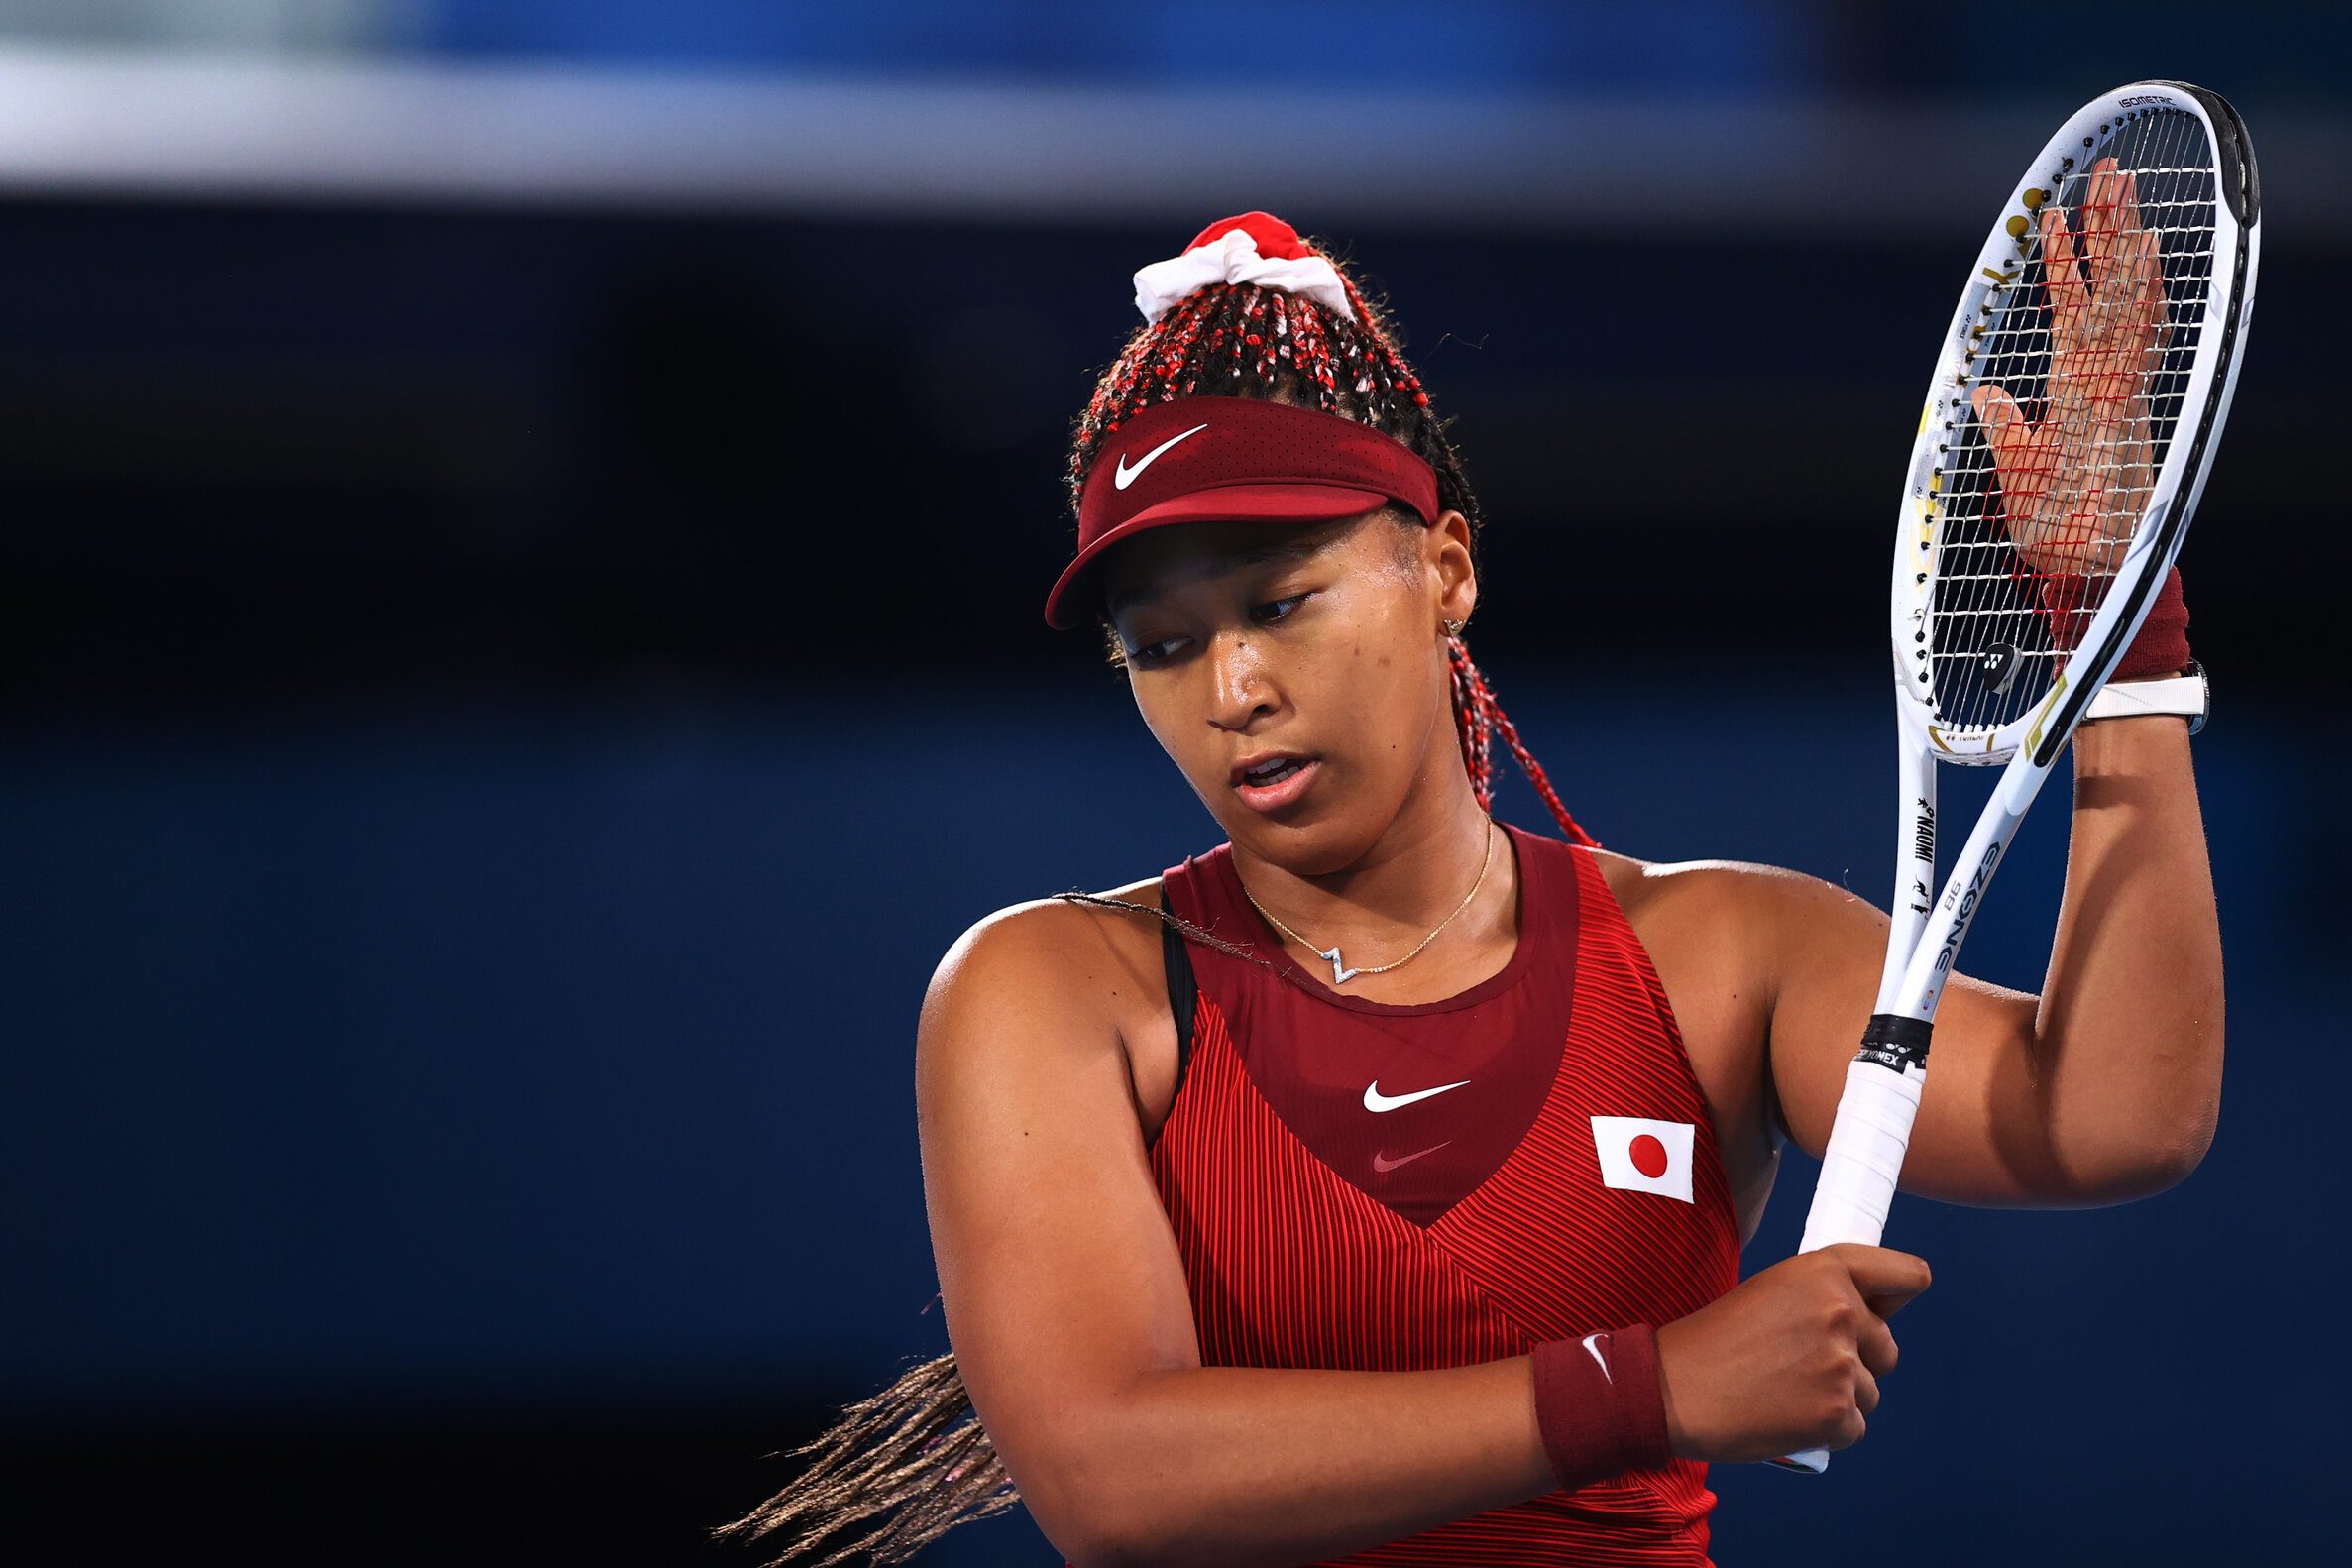 Osaka bats aside recent disappointment ahead of US Open title defense